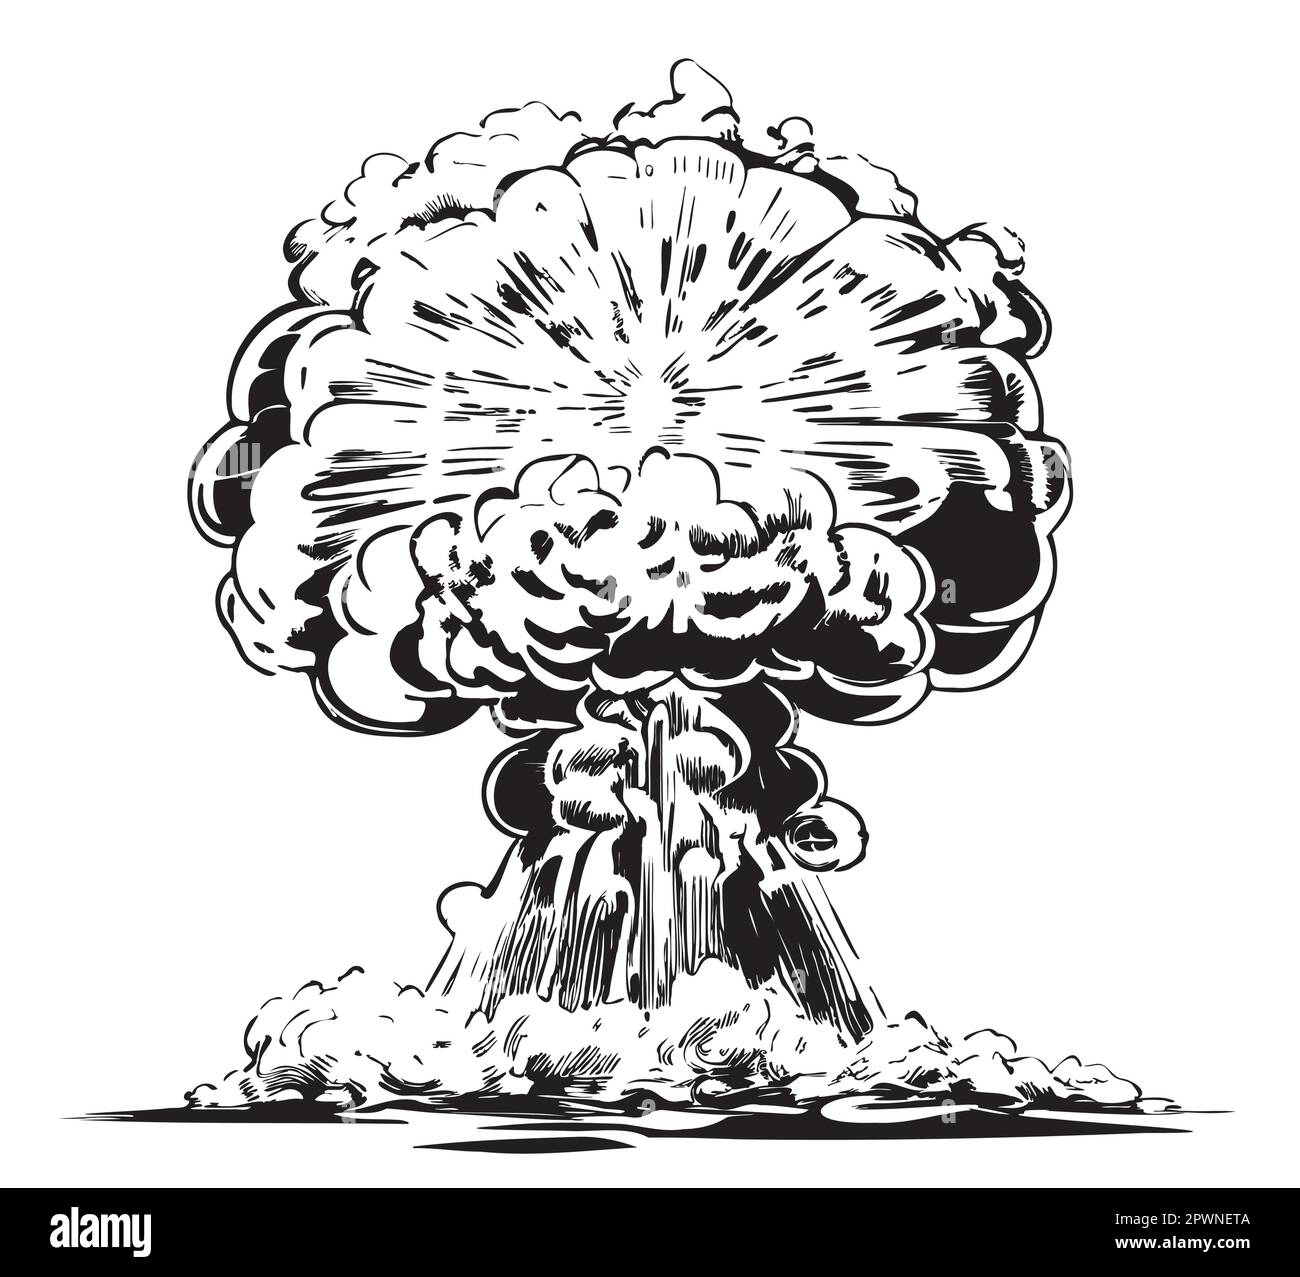 atomic bomb explosion drawing